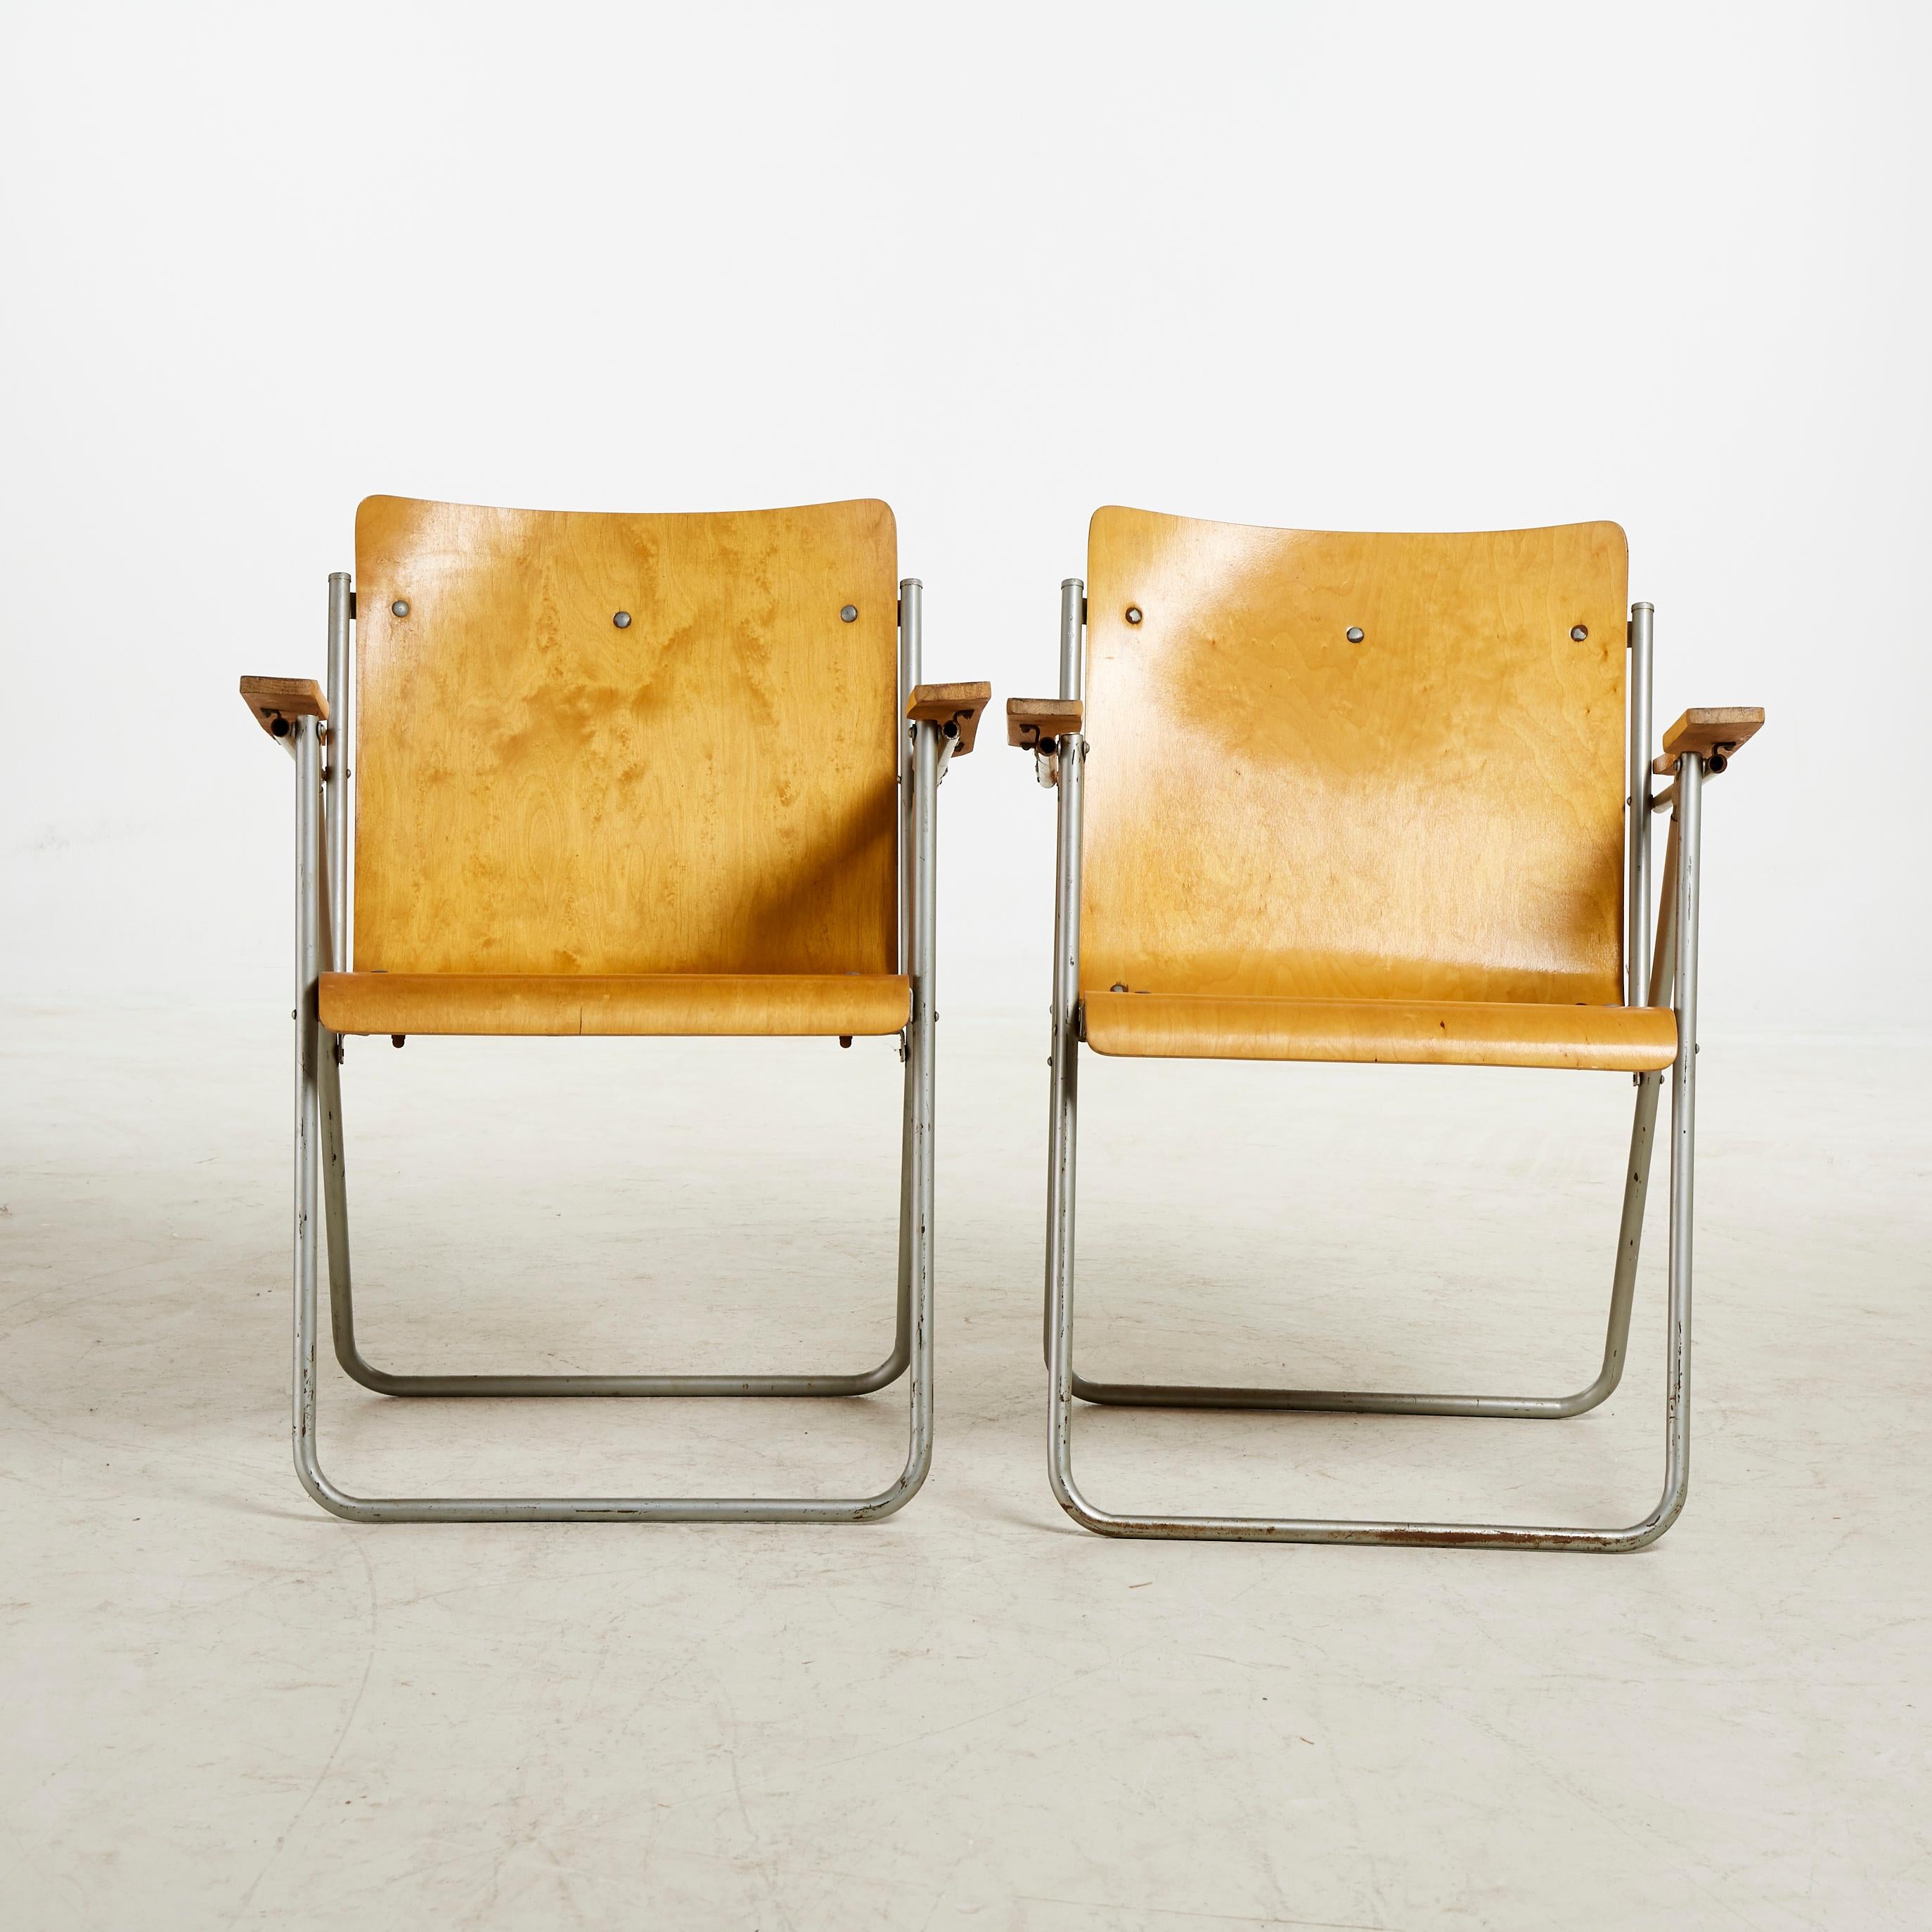 Scandinavian pair of folding chairs made in 1940s, frame in metal and molded birch.